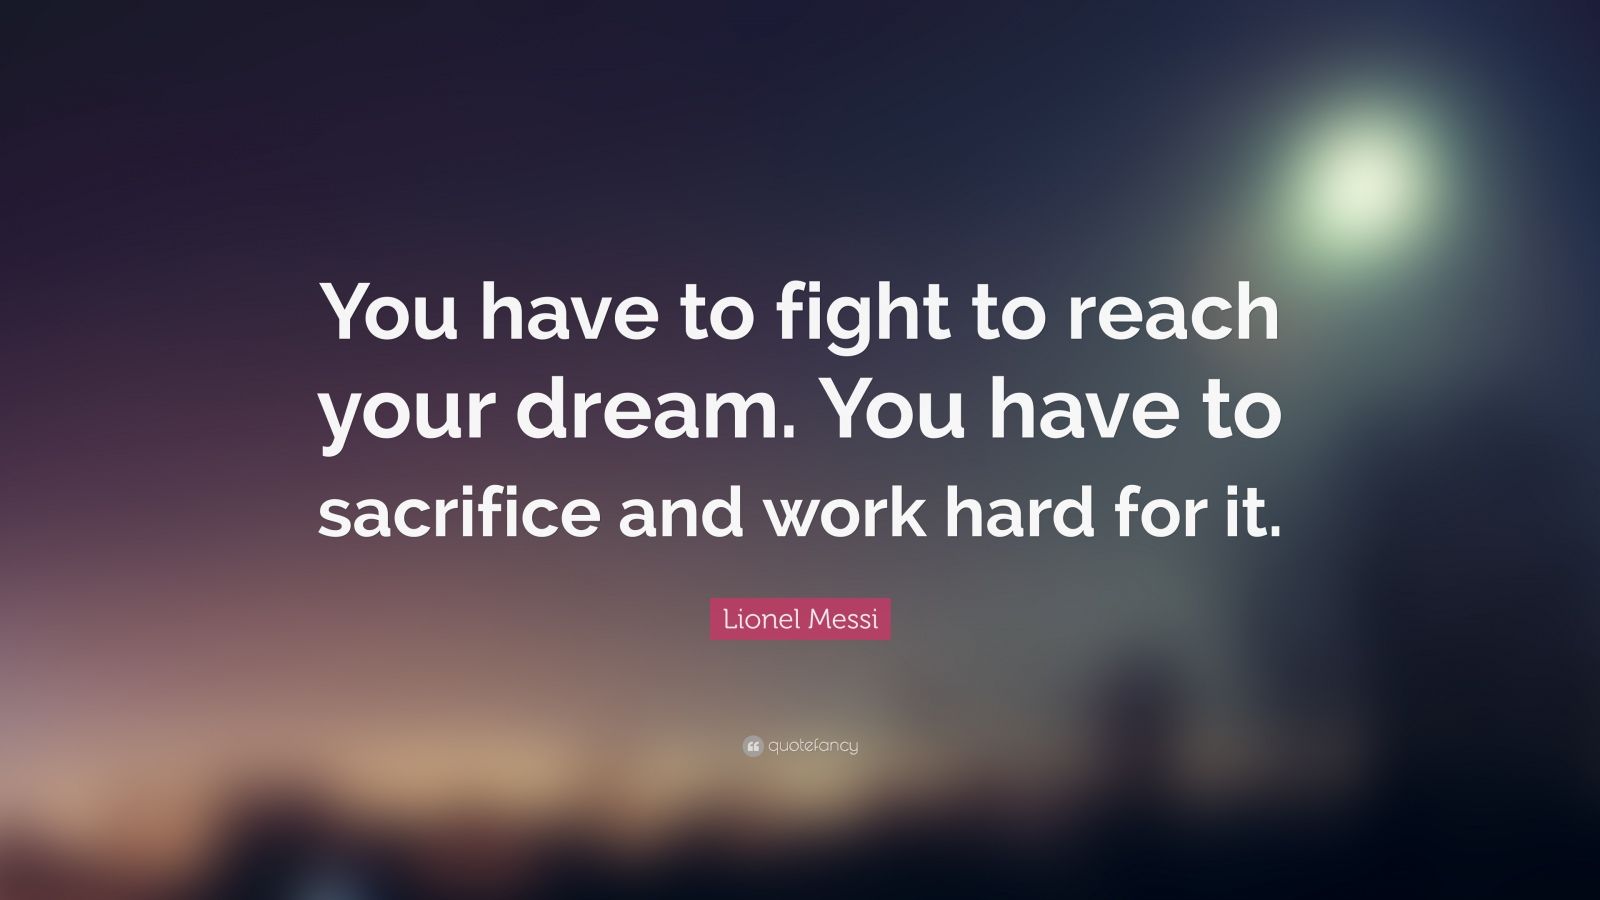 Lionel Messi Quote: “You have to fight to reach your dream. You